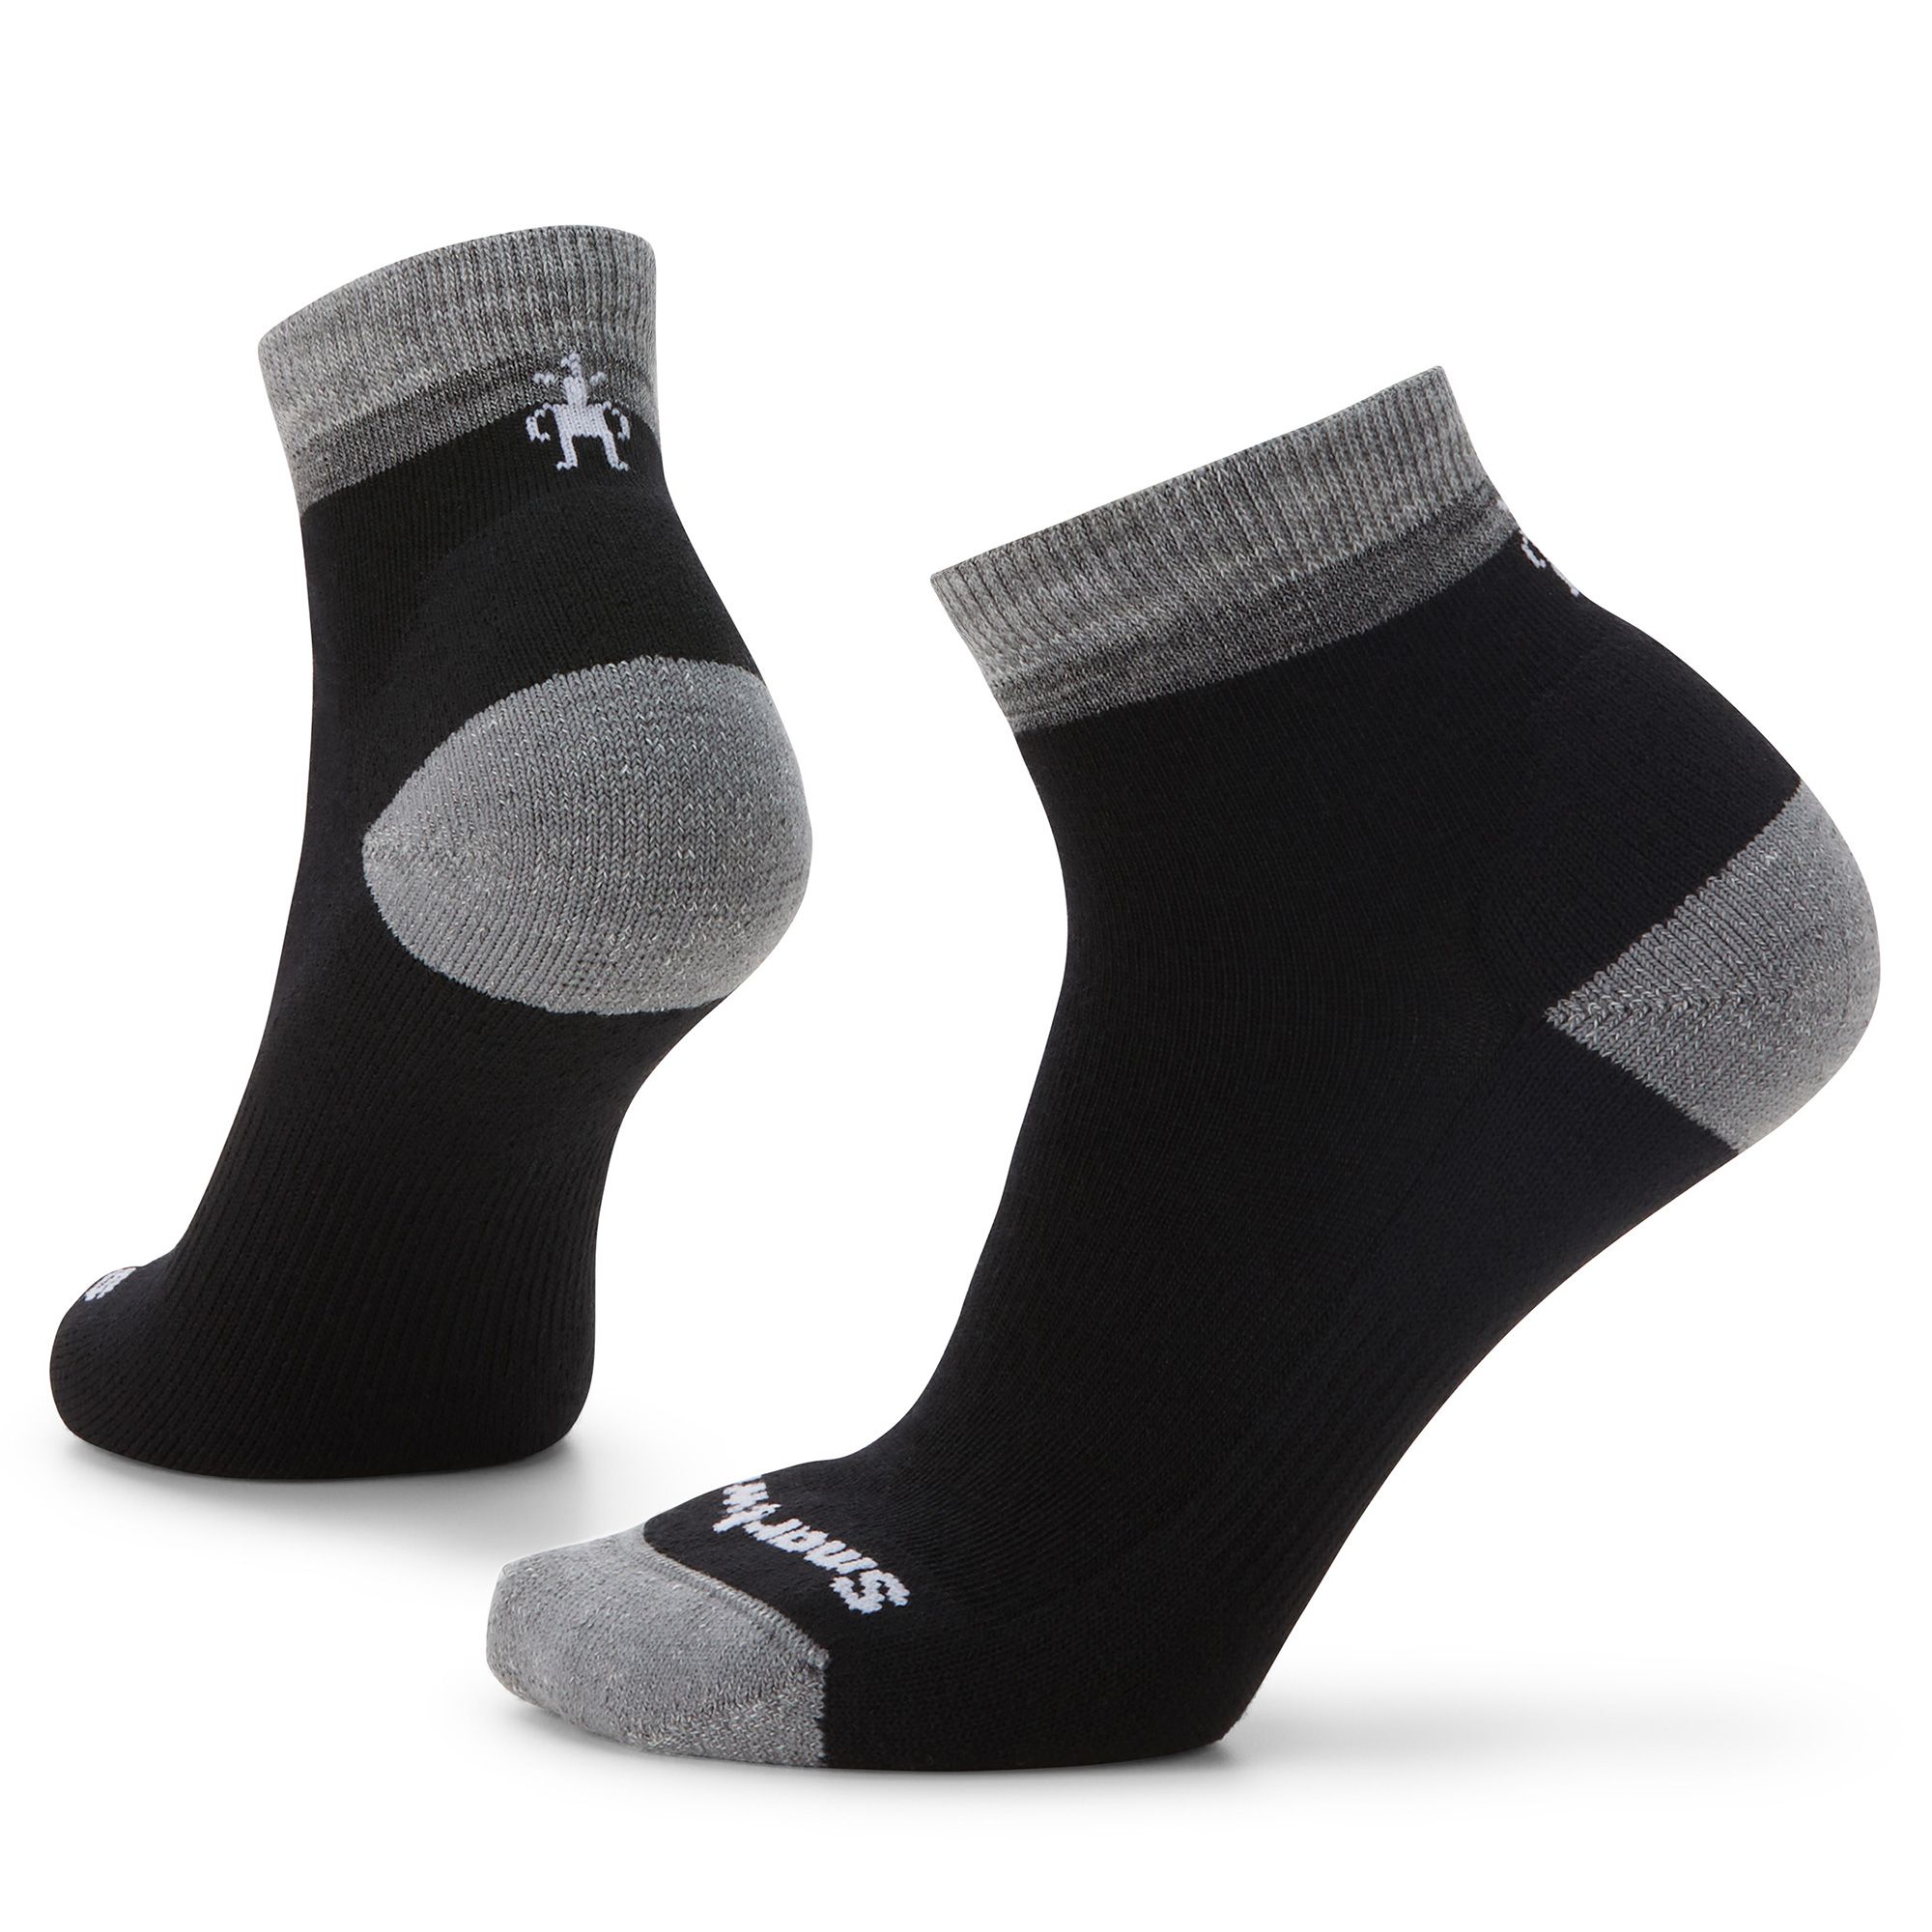 Adult Size Ankle Sock